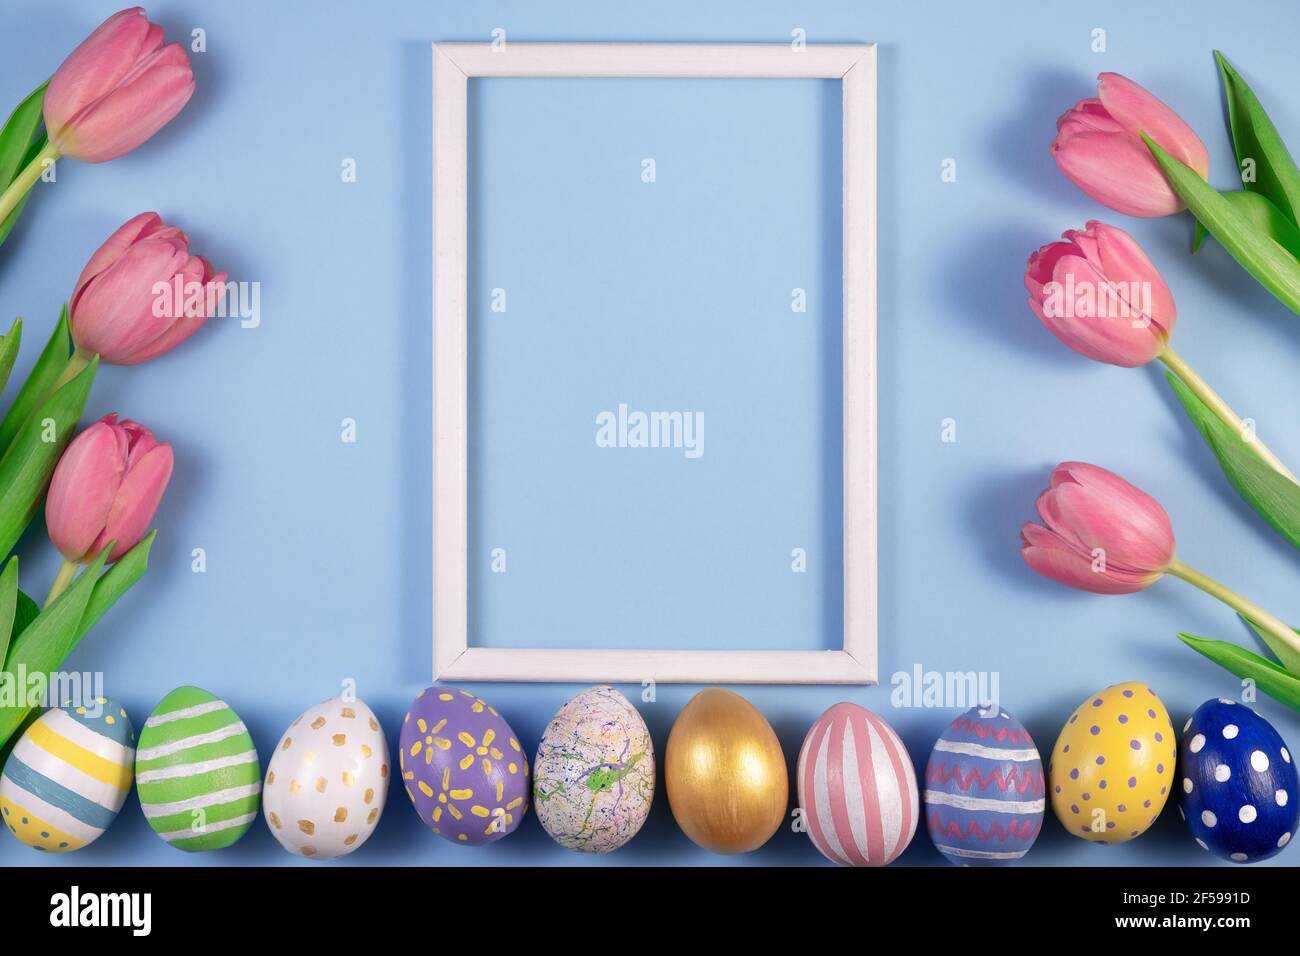 Tulips flowers and Easter eggs with wooden frame on blue ...